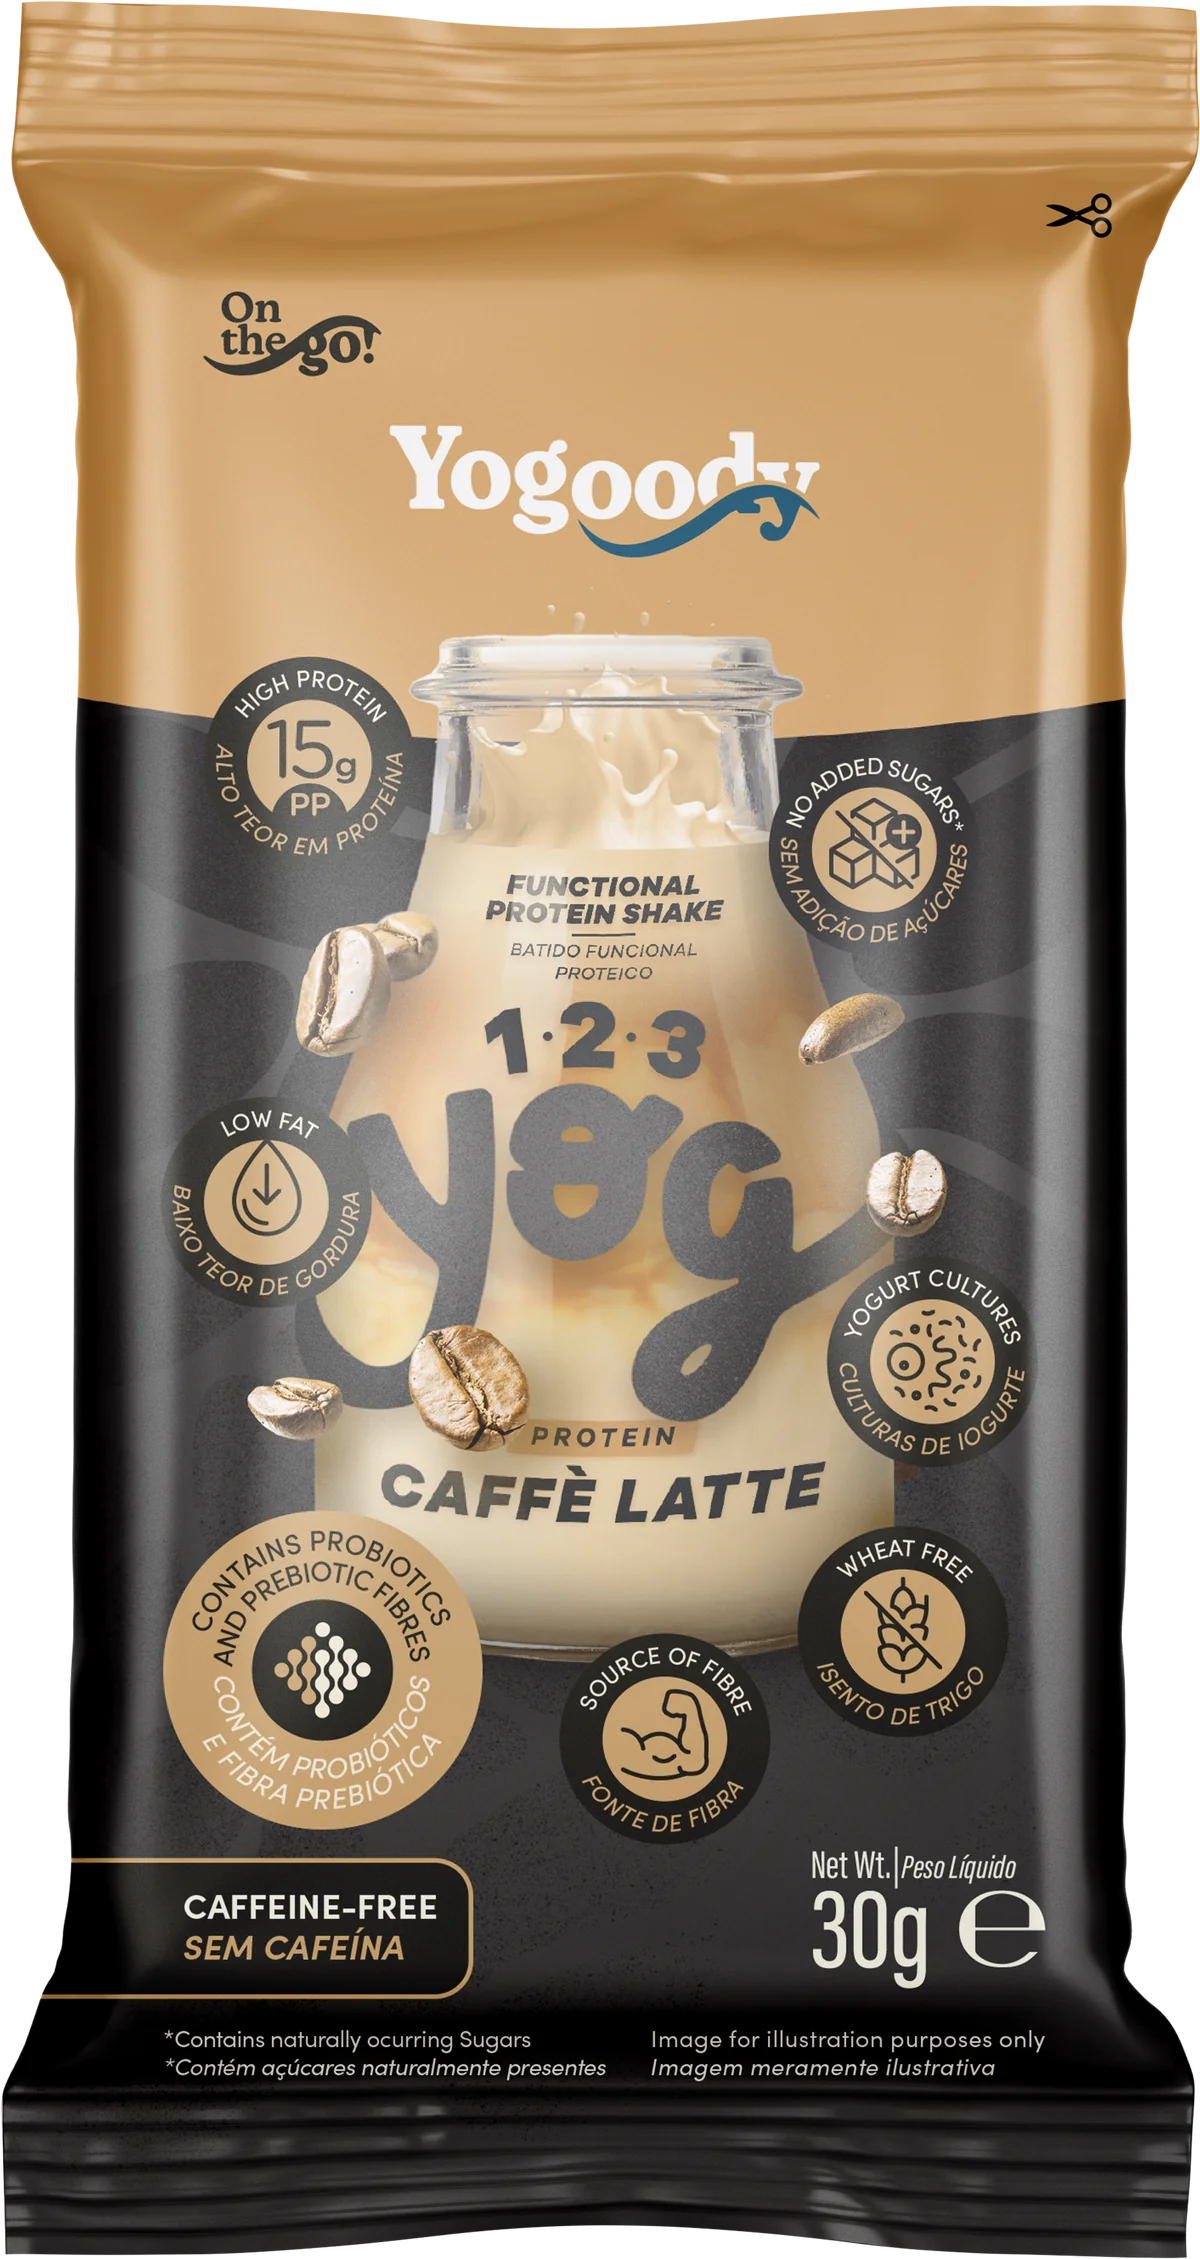 Welcome Pack - 1.2.3. YOG Protein Caffe Latte (caffeine-free) and Strawberry Shakes (10 x 30g sachets + FREE shaker)